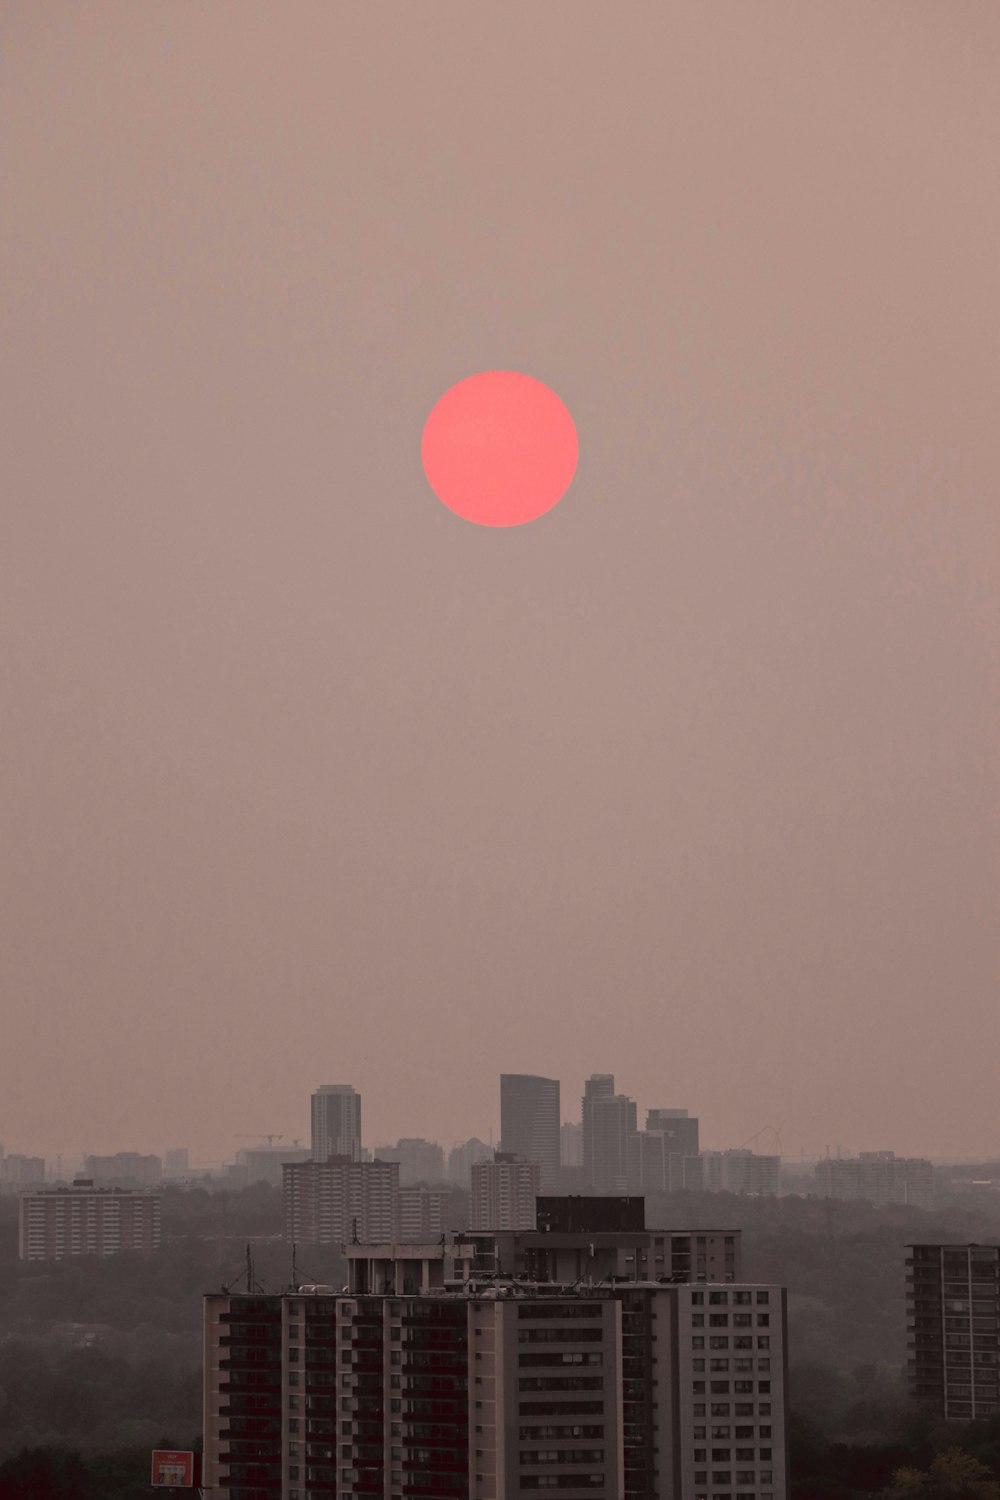 city skyline during sunset with red moon